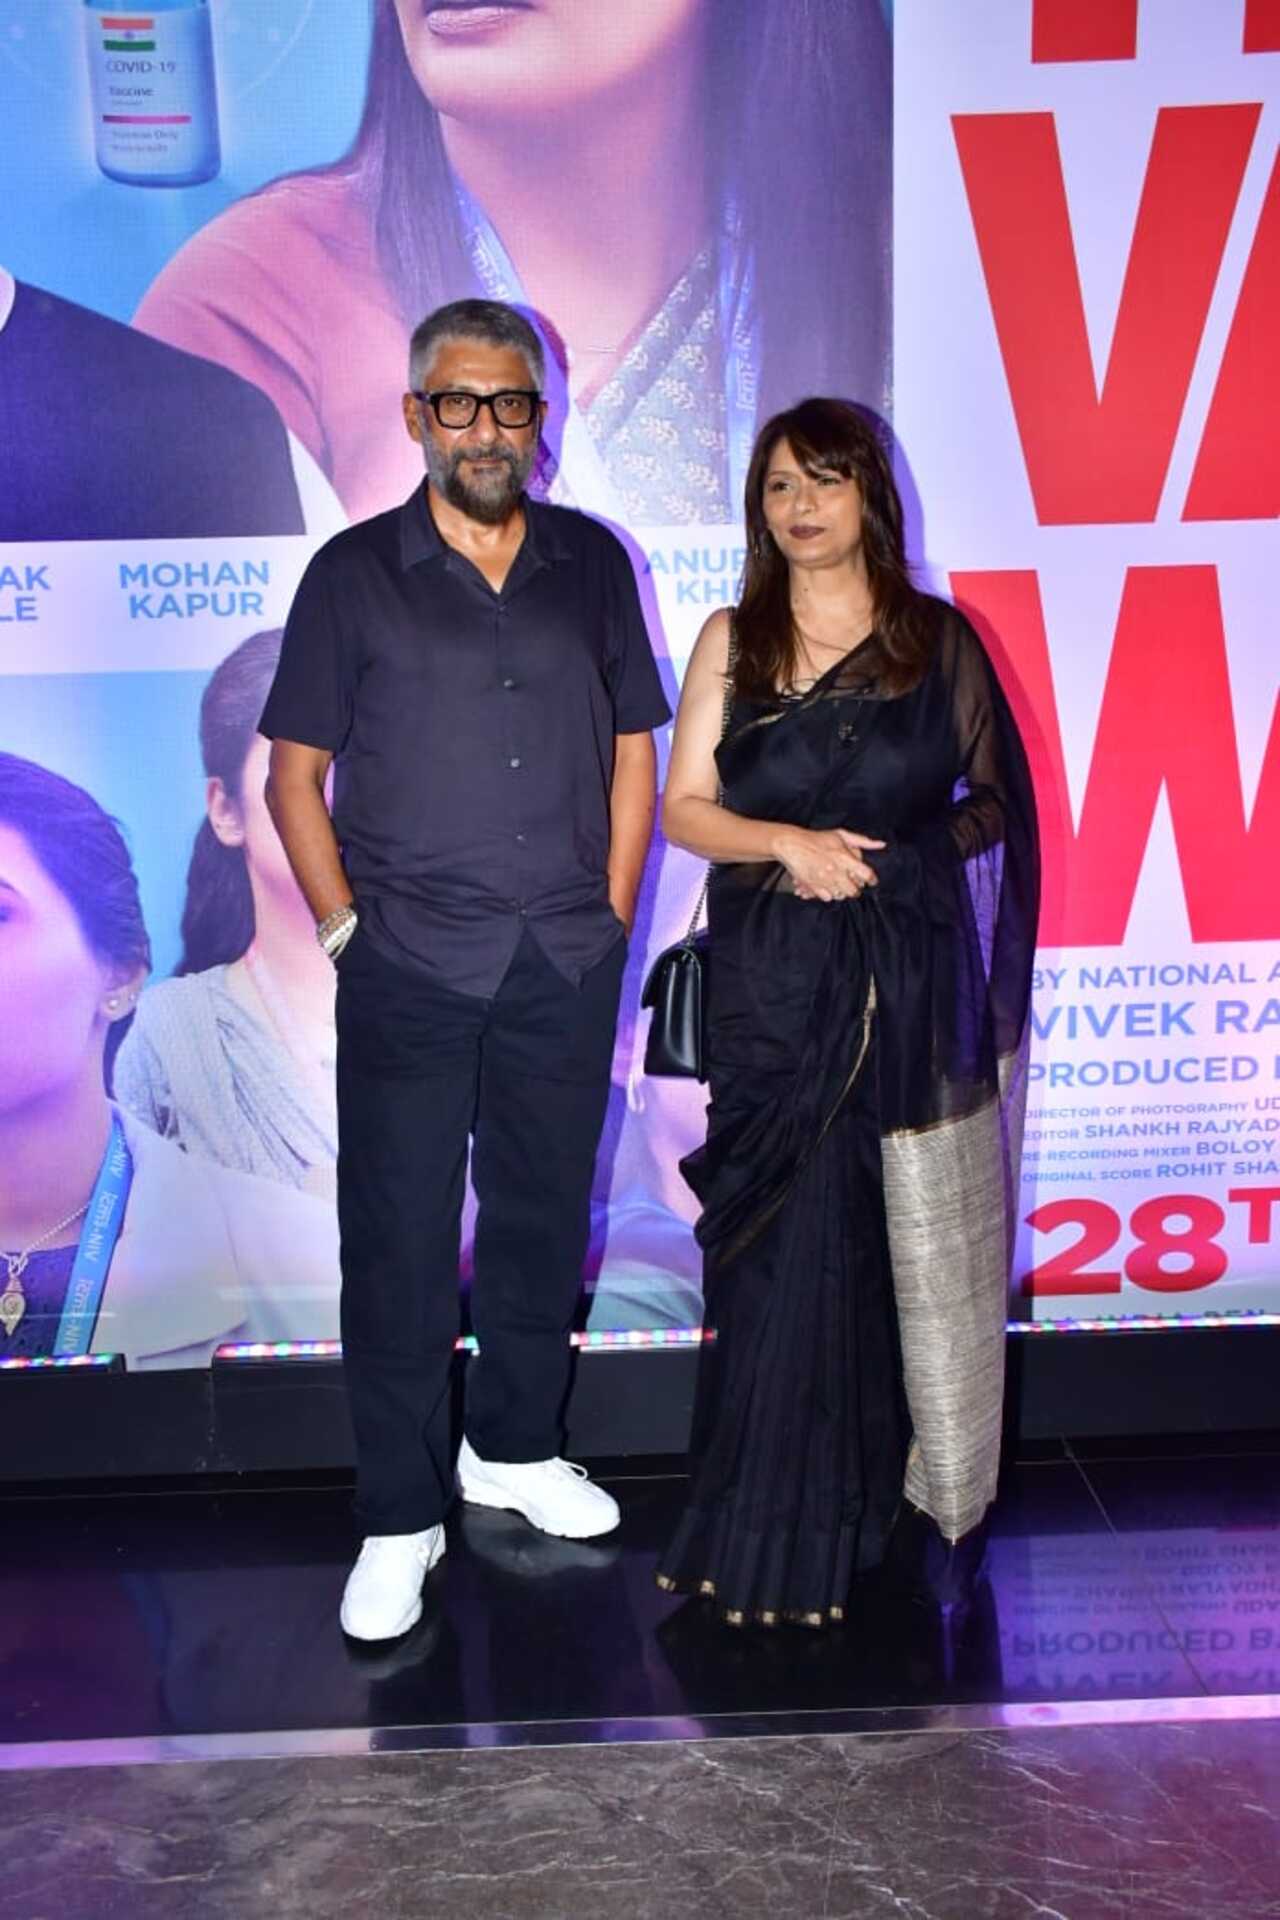 Vivek Agnihotri and Pallavi Joshi unveiled the trailer of their upcoming film, The Vaccine War. The star couple attended the launch event held in Mumbai today